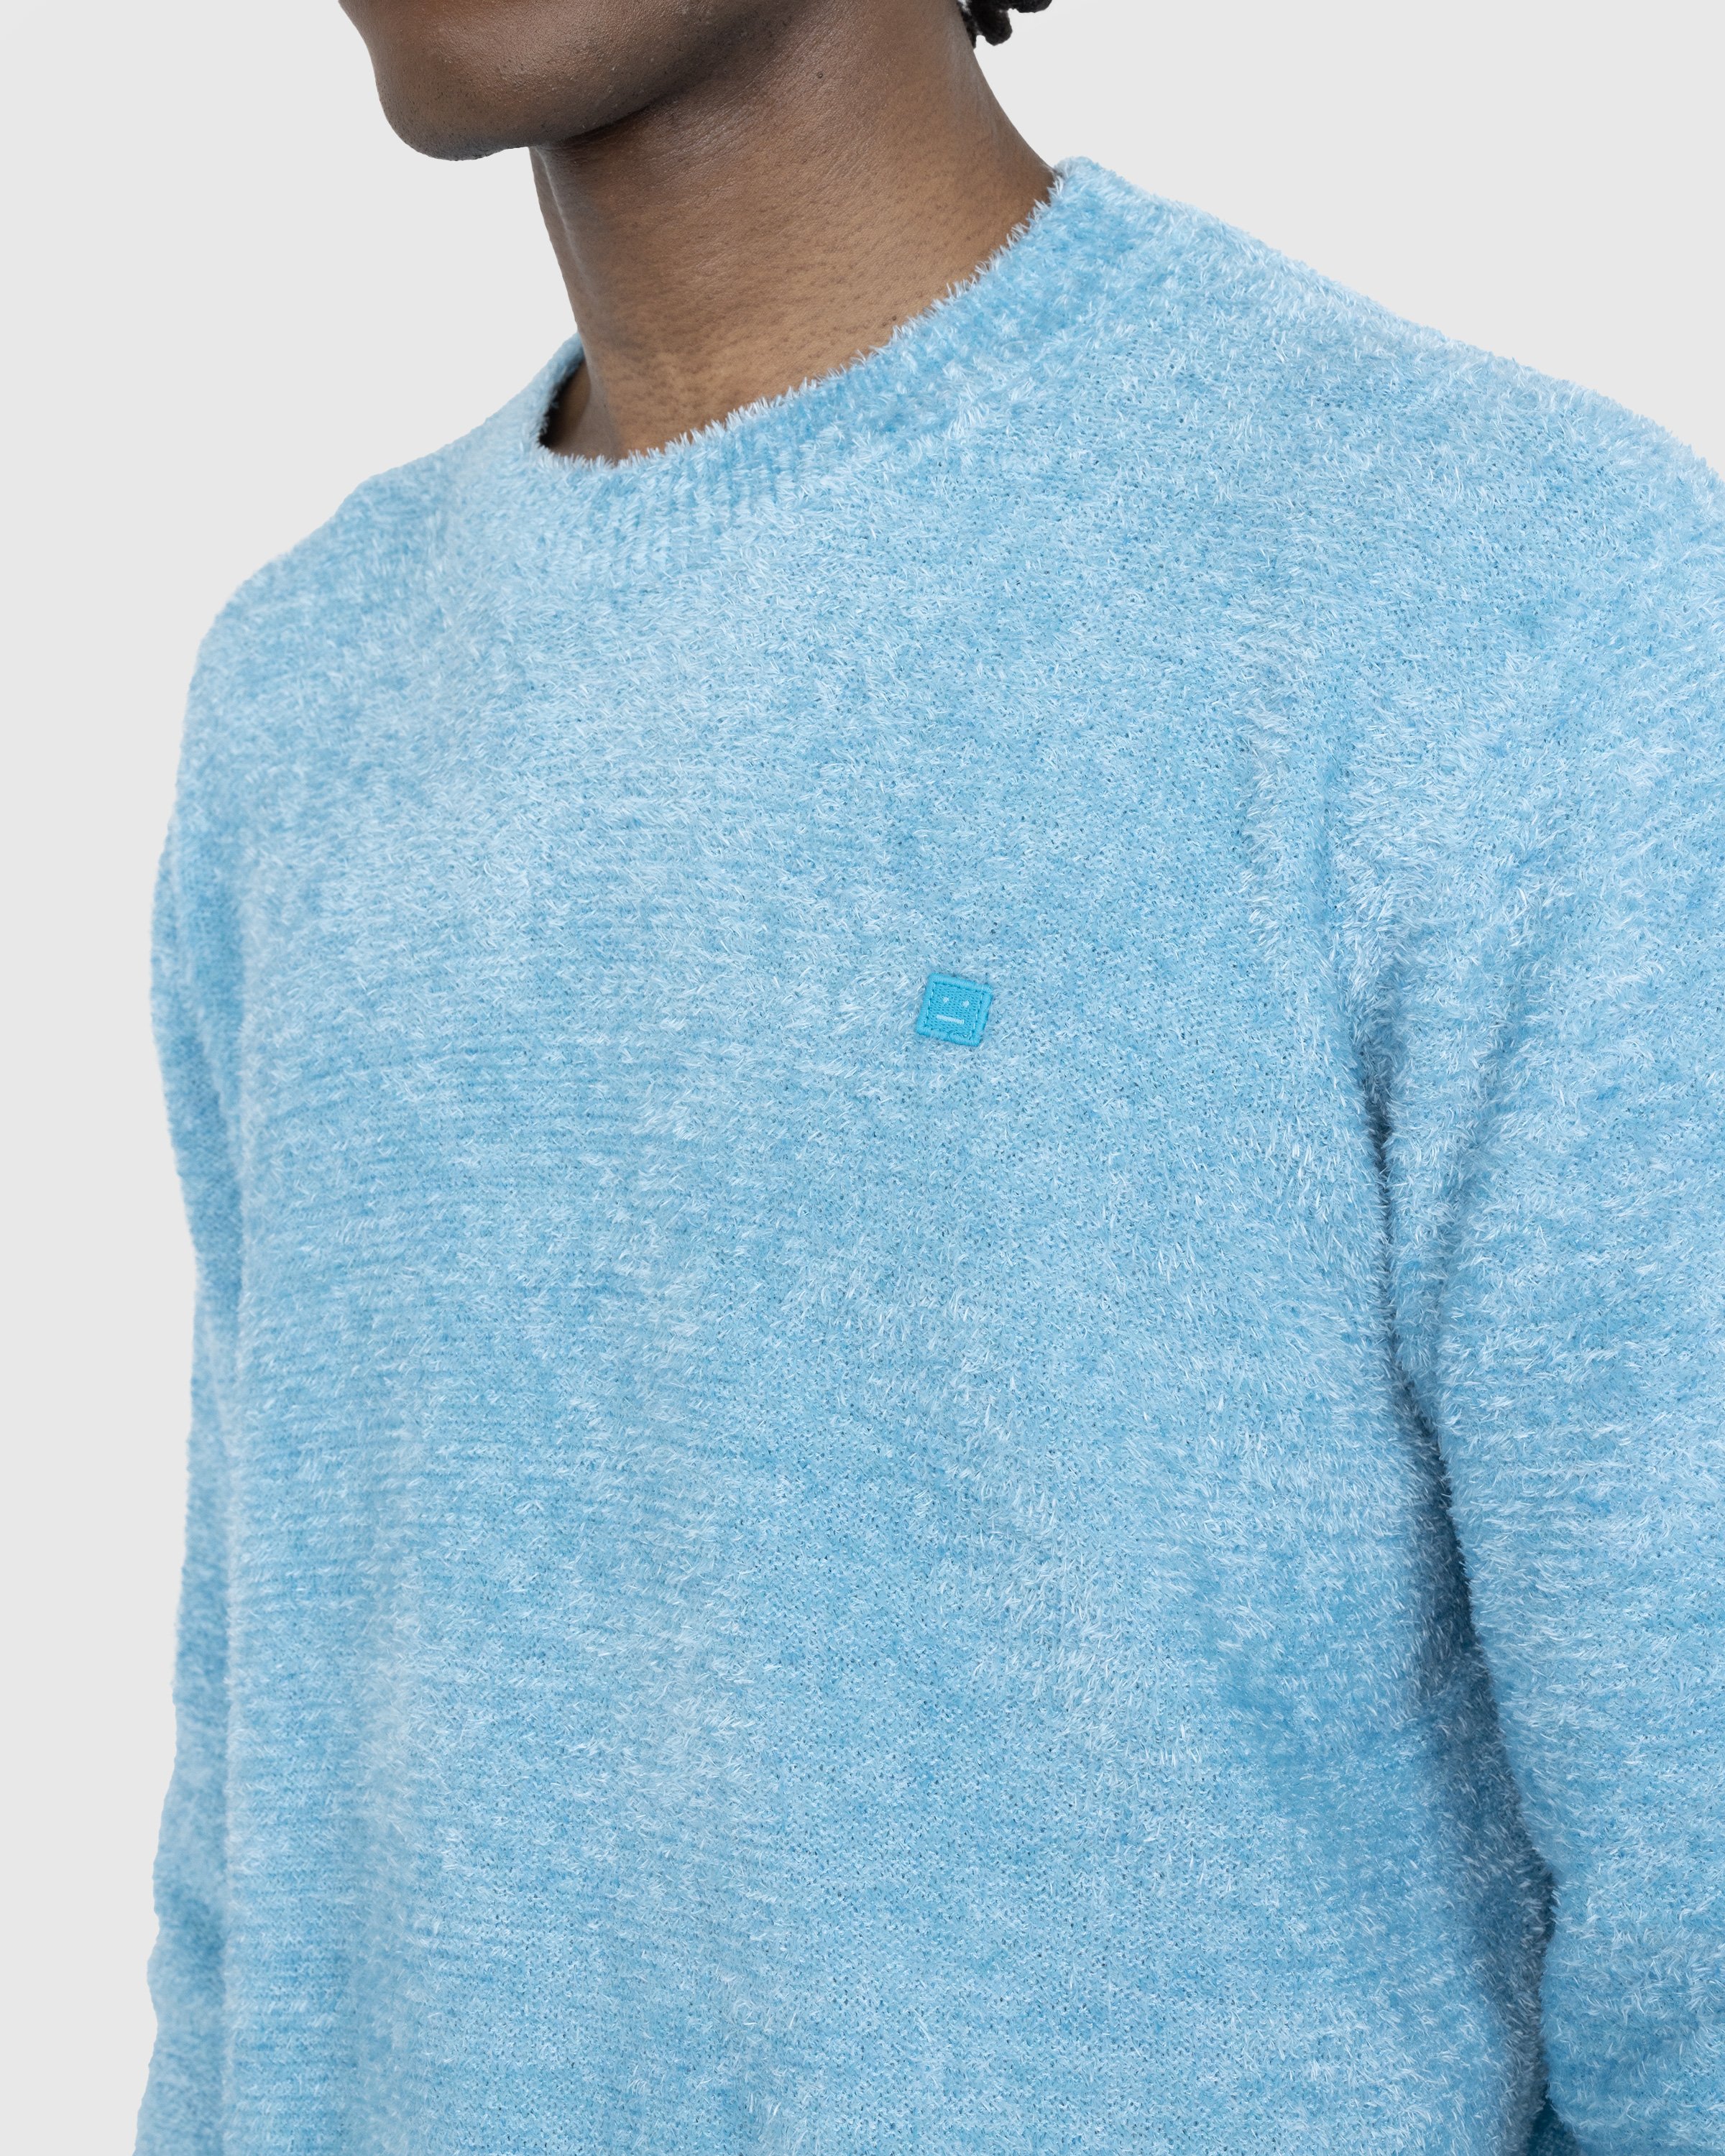 Acne Studios - Textured Sweater Teal Blue - Clothing - Blue - Image 4